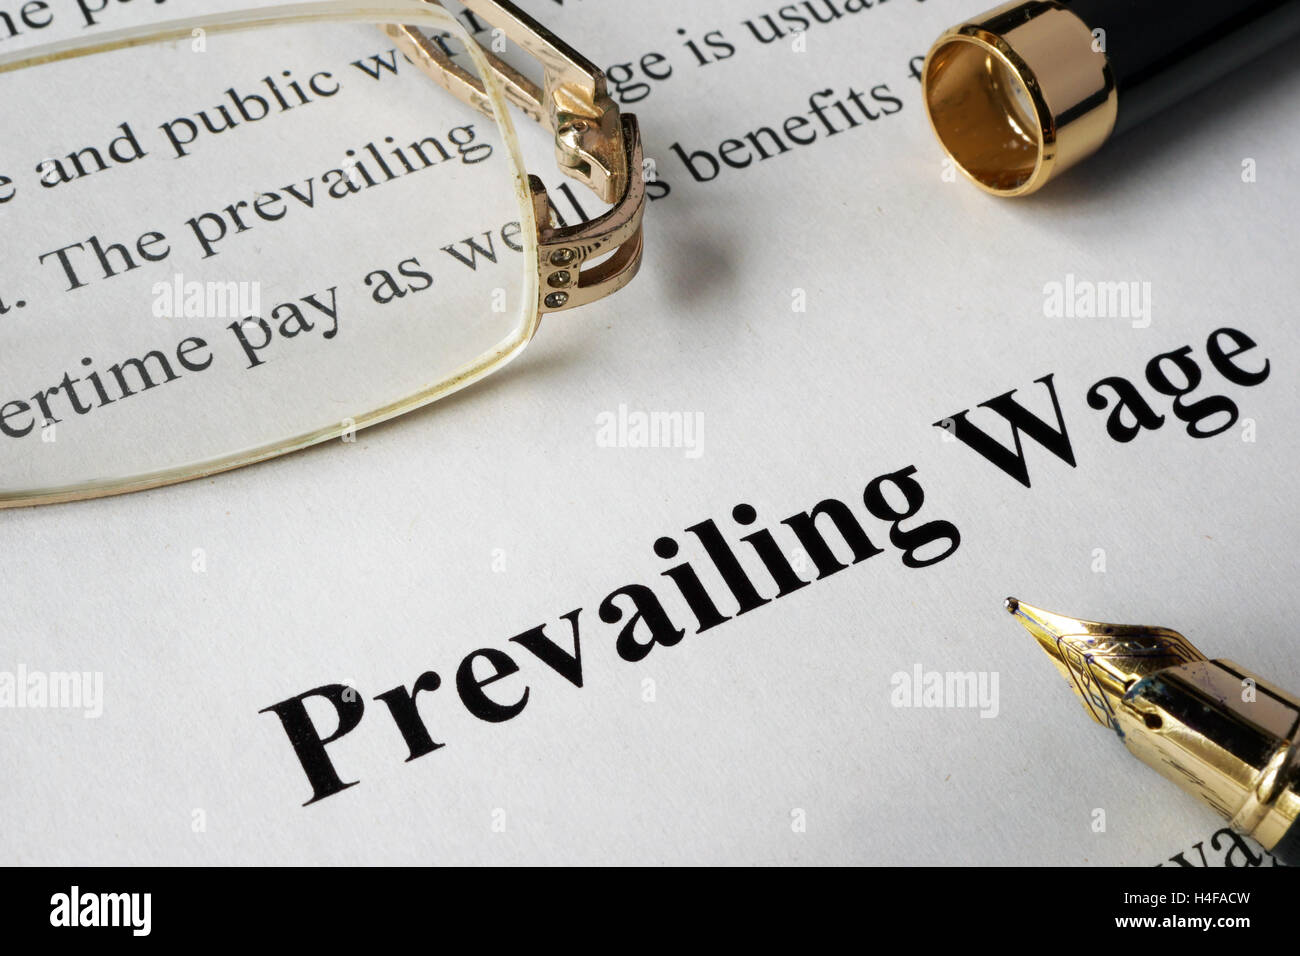 Prevailing wage concept written on a paper. Stock Photo